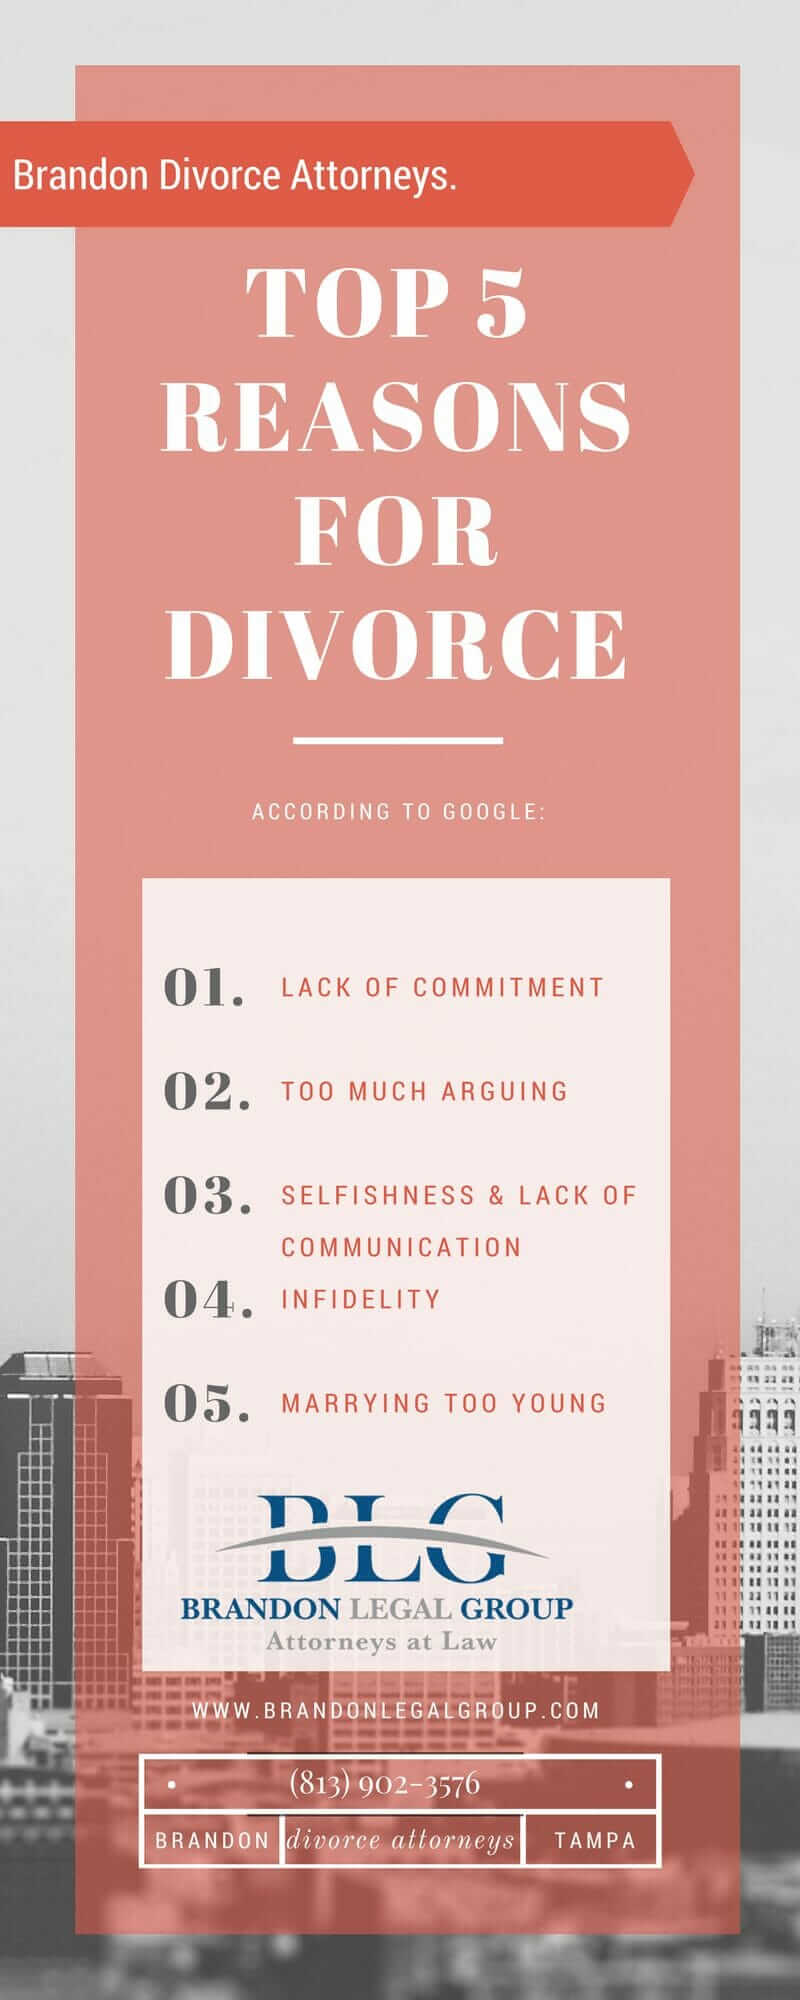 Top 5 reasons for Divorce, Is this what you expected??